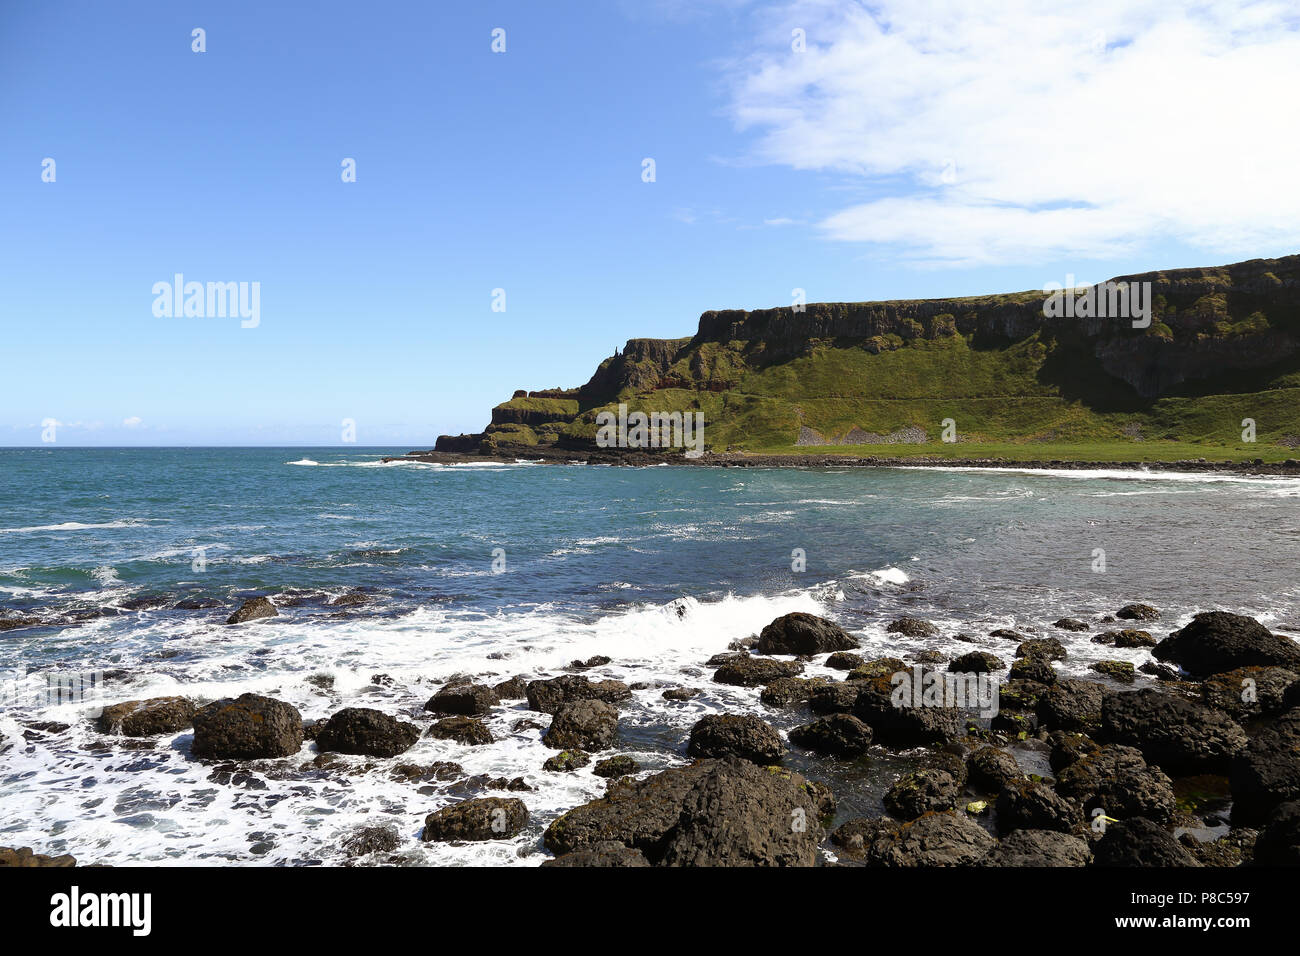 The Giant's Causeway is an area of about 40,000 interlocking basalt columns, the result of an ancient volcanic fissure eruption. It is located in Coun Stock Photo